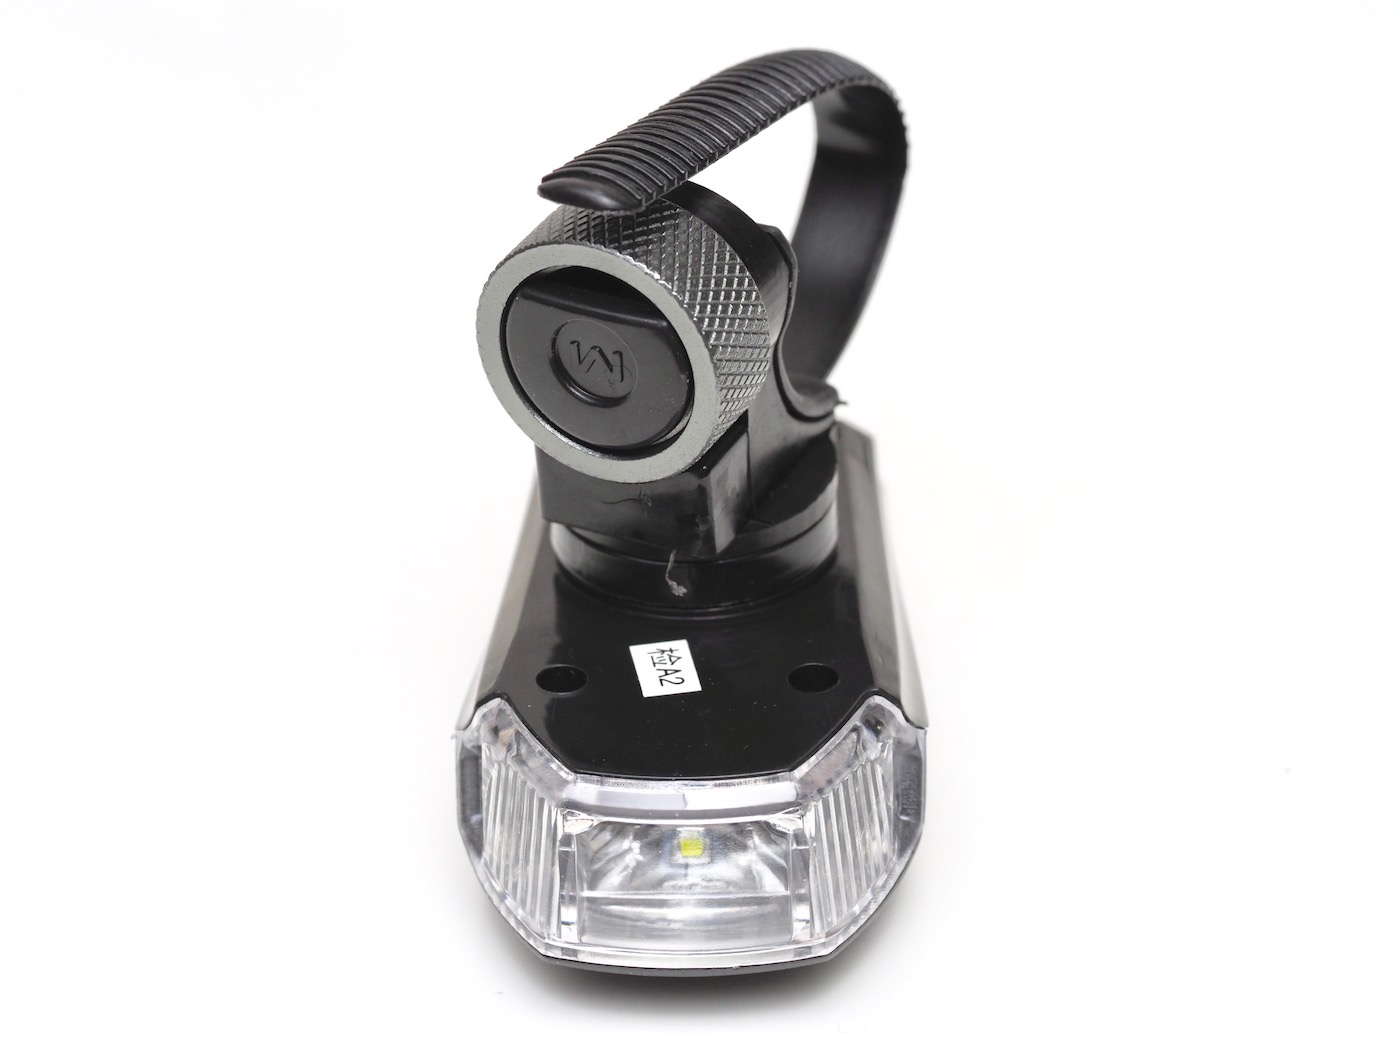 Cree xpg 2 cheap chinese led light with wide angle lens for bicycle 00020